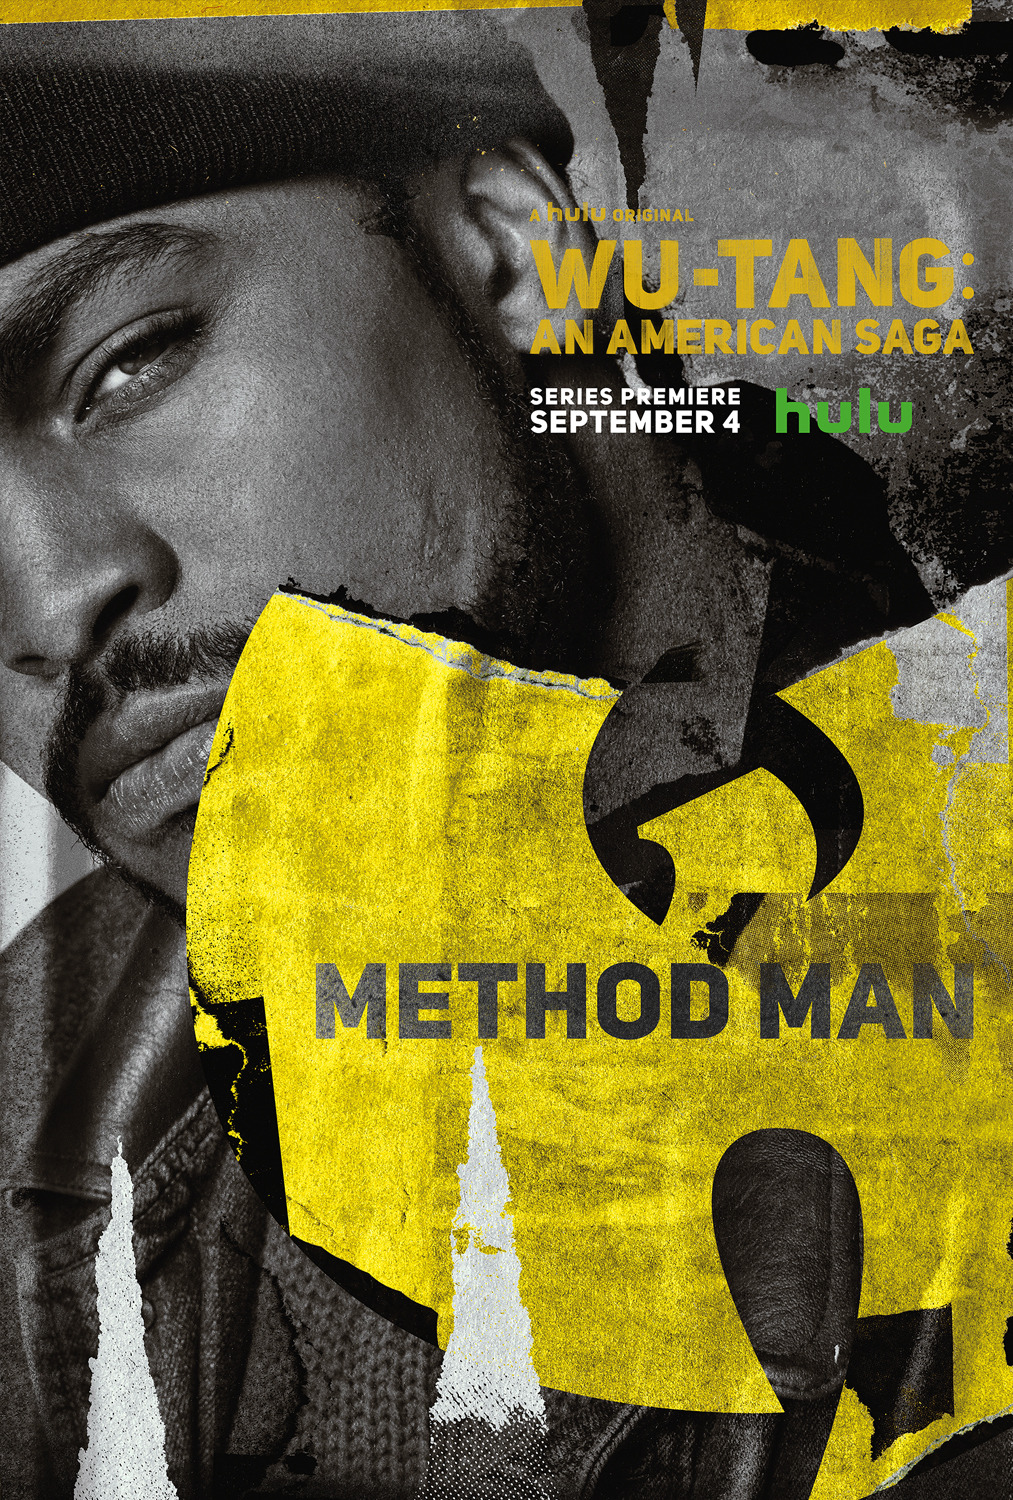 Extra Large TV Poster Image for Wu-Tang: An American Saga (#4 of 22)